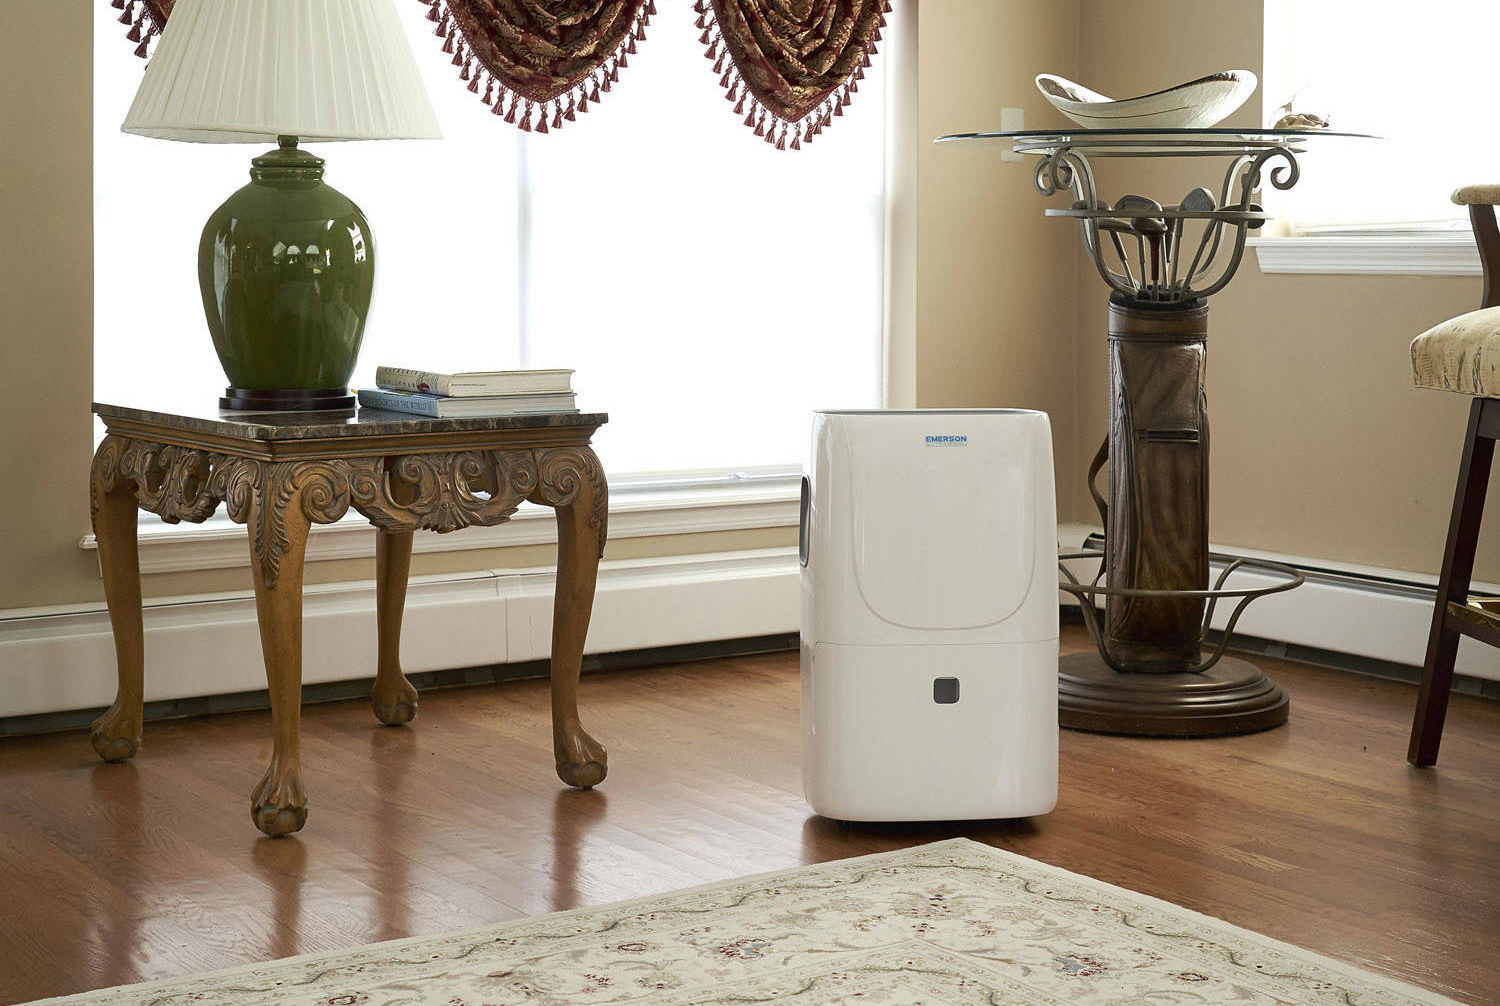 walmart drops prices for frigidaire ge and emerson dehumidifiers quiet kool 70 pint dehumidifier with internal pump 2